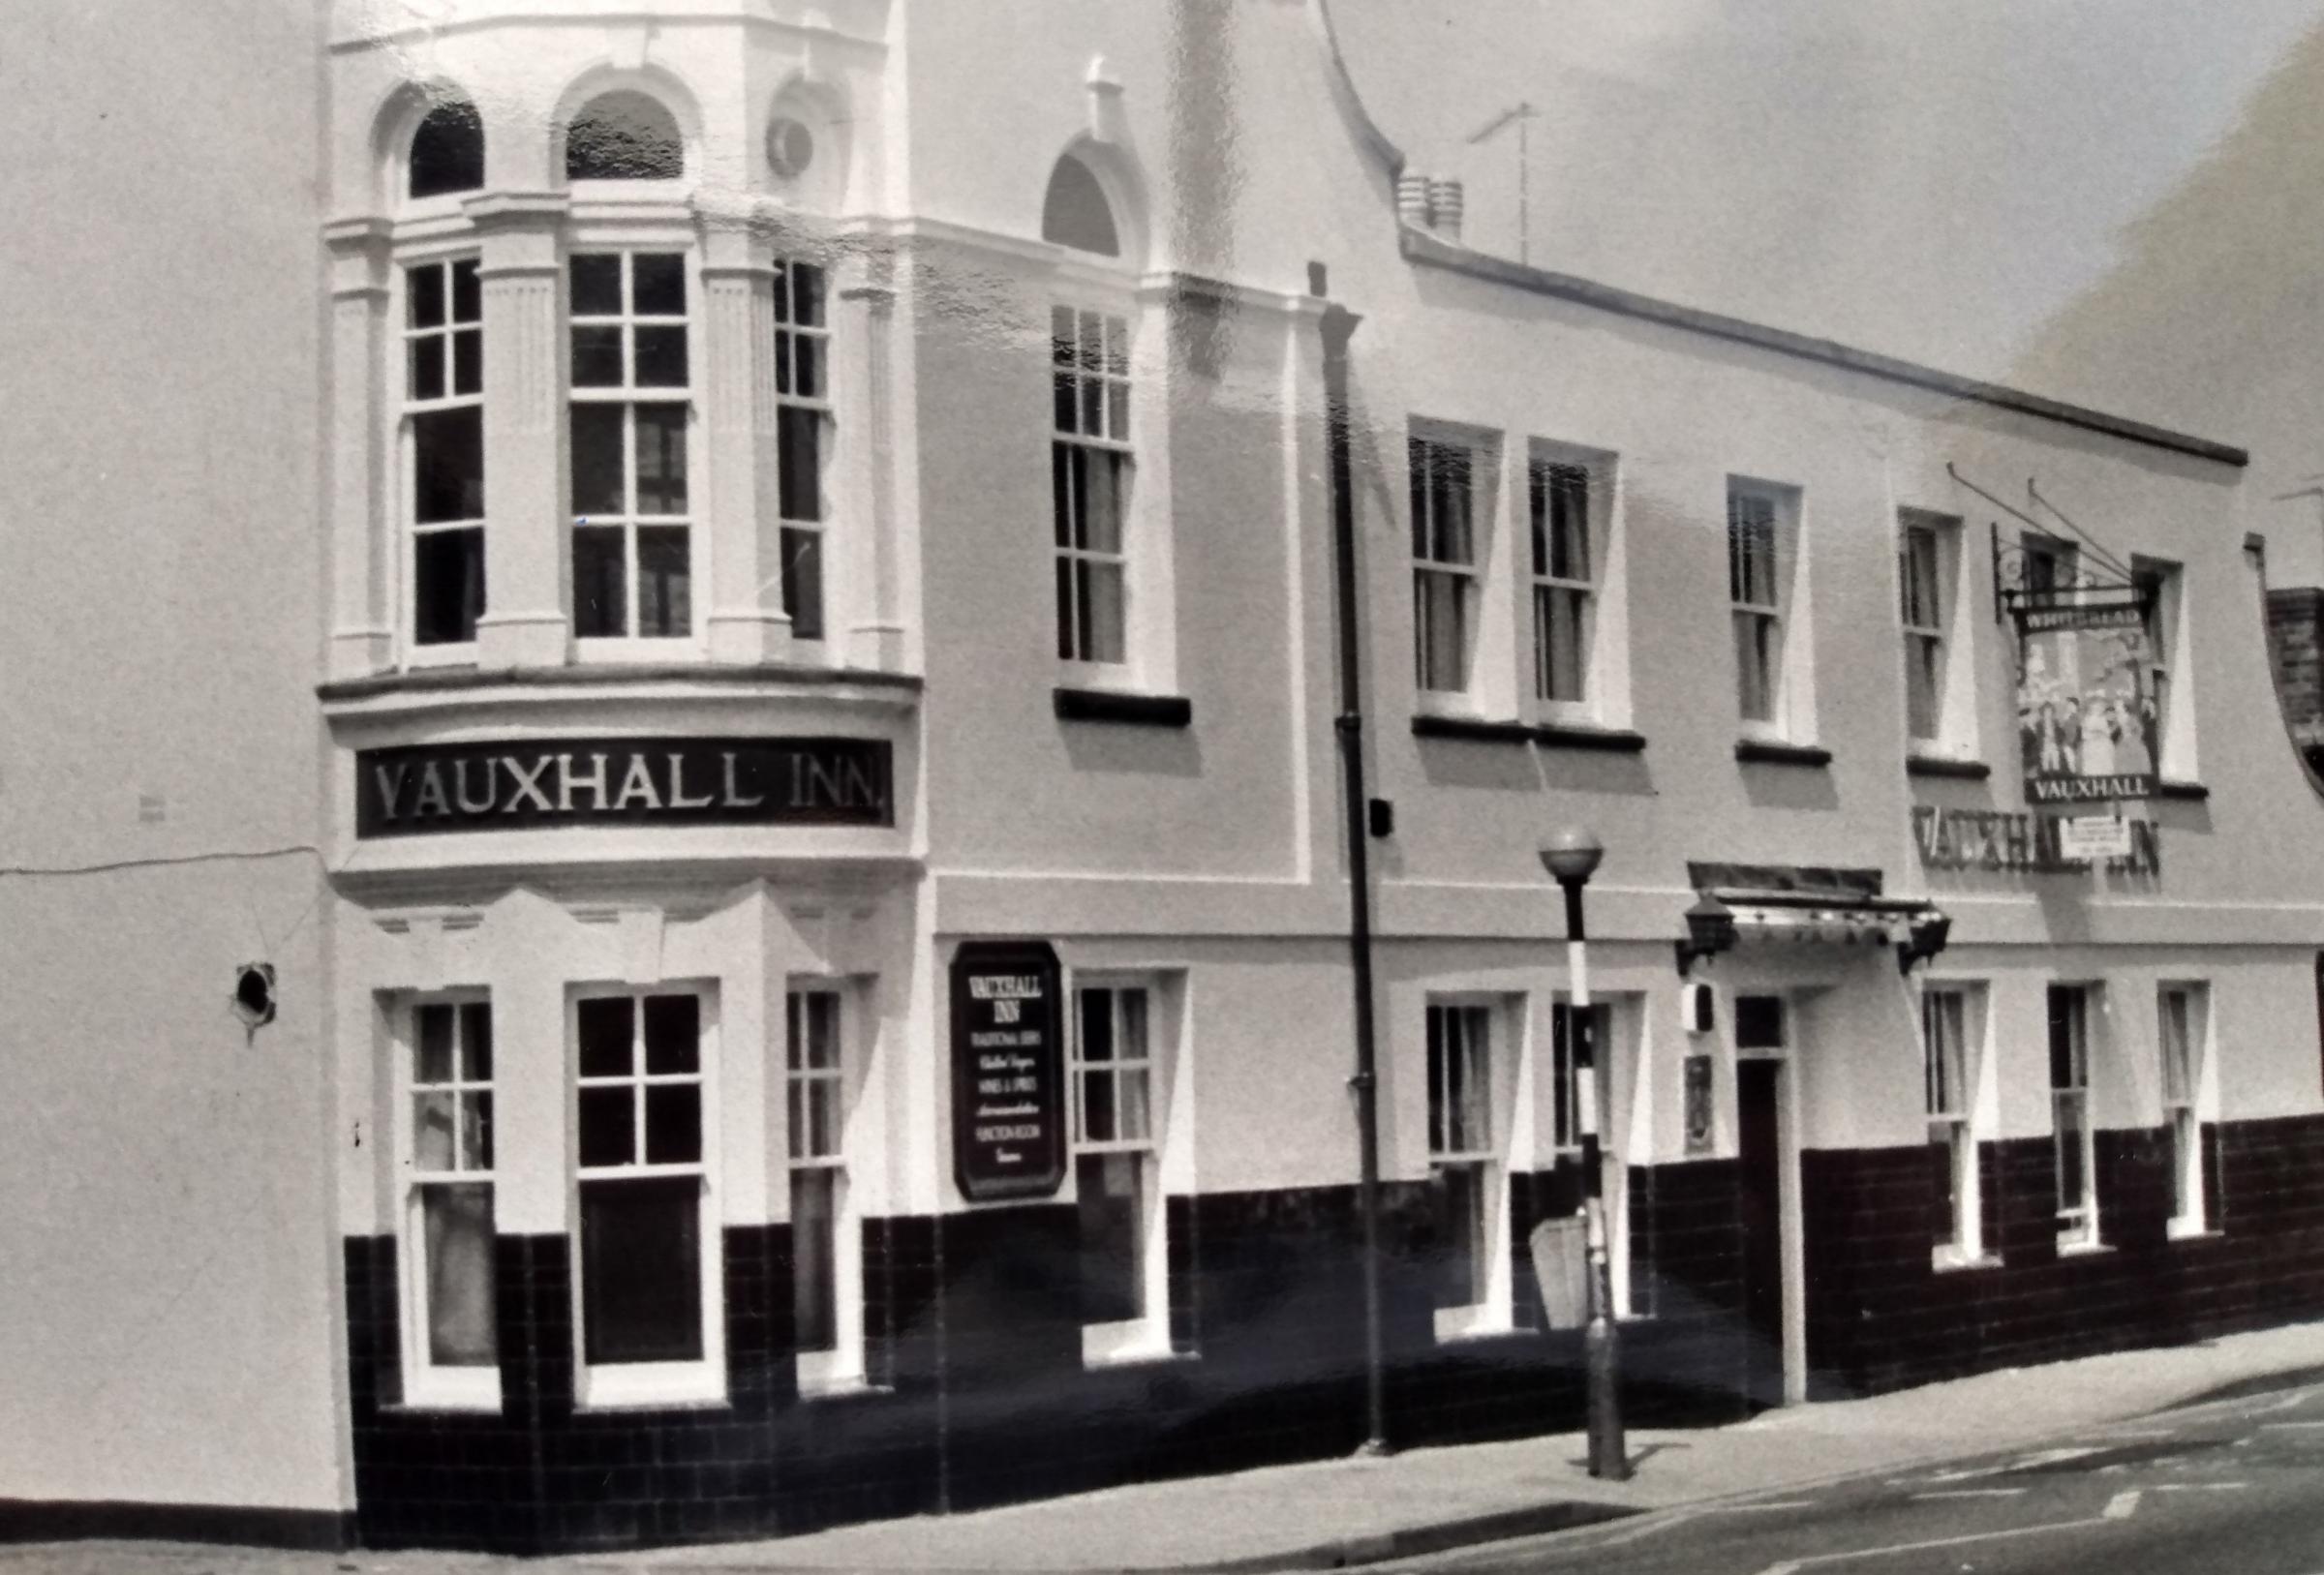 The Vauxhall Inn as it stood in May 1988. The building now houses the Balti Mahal restaurant and takeaway